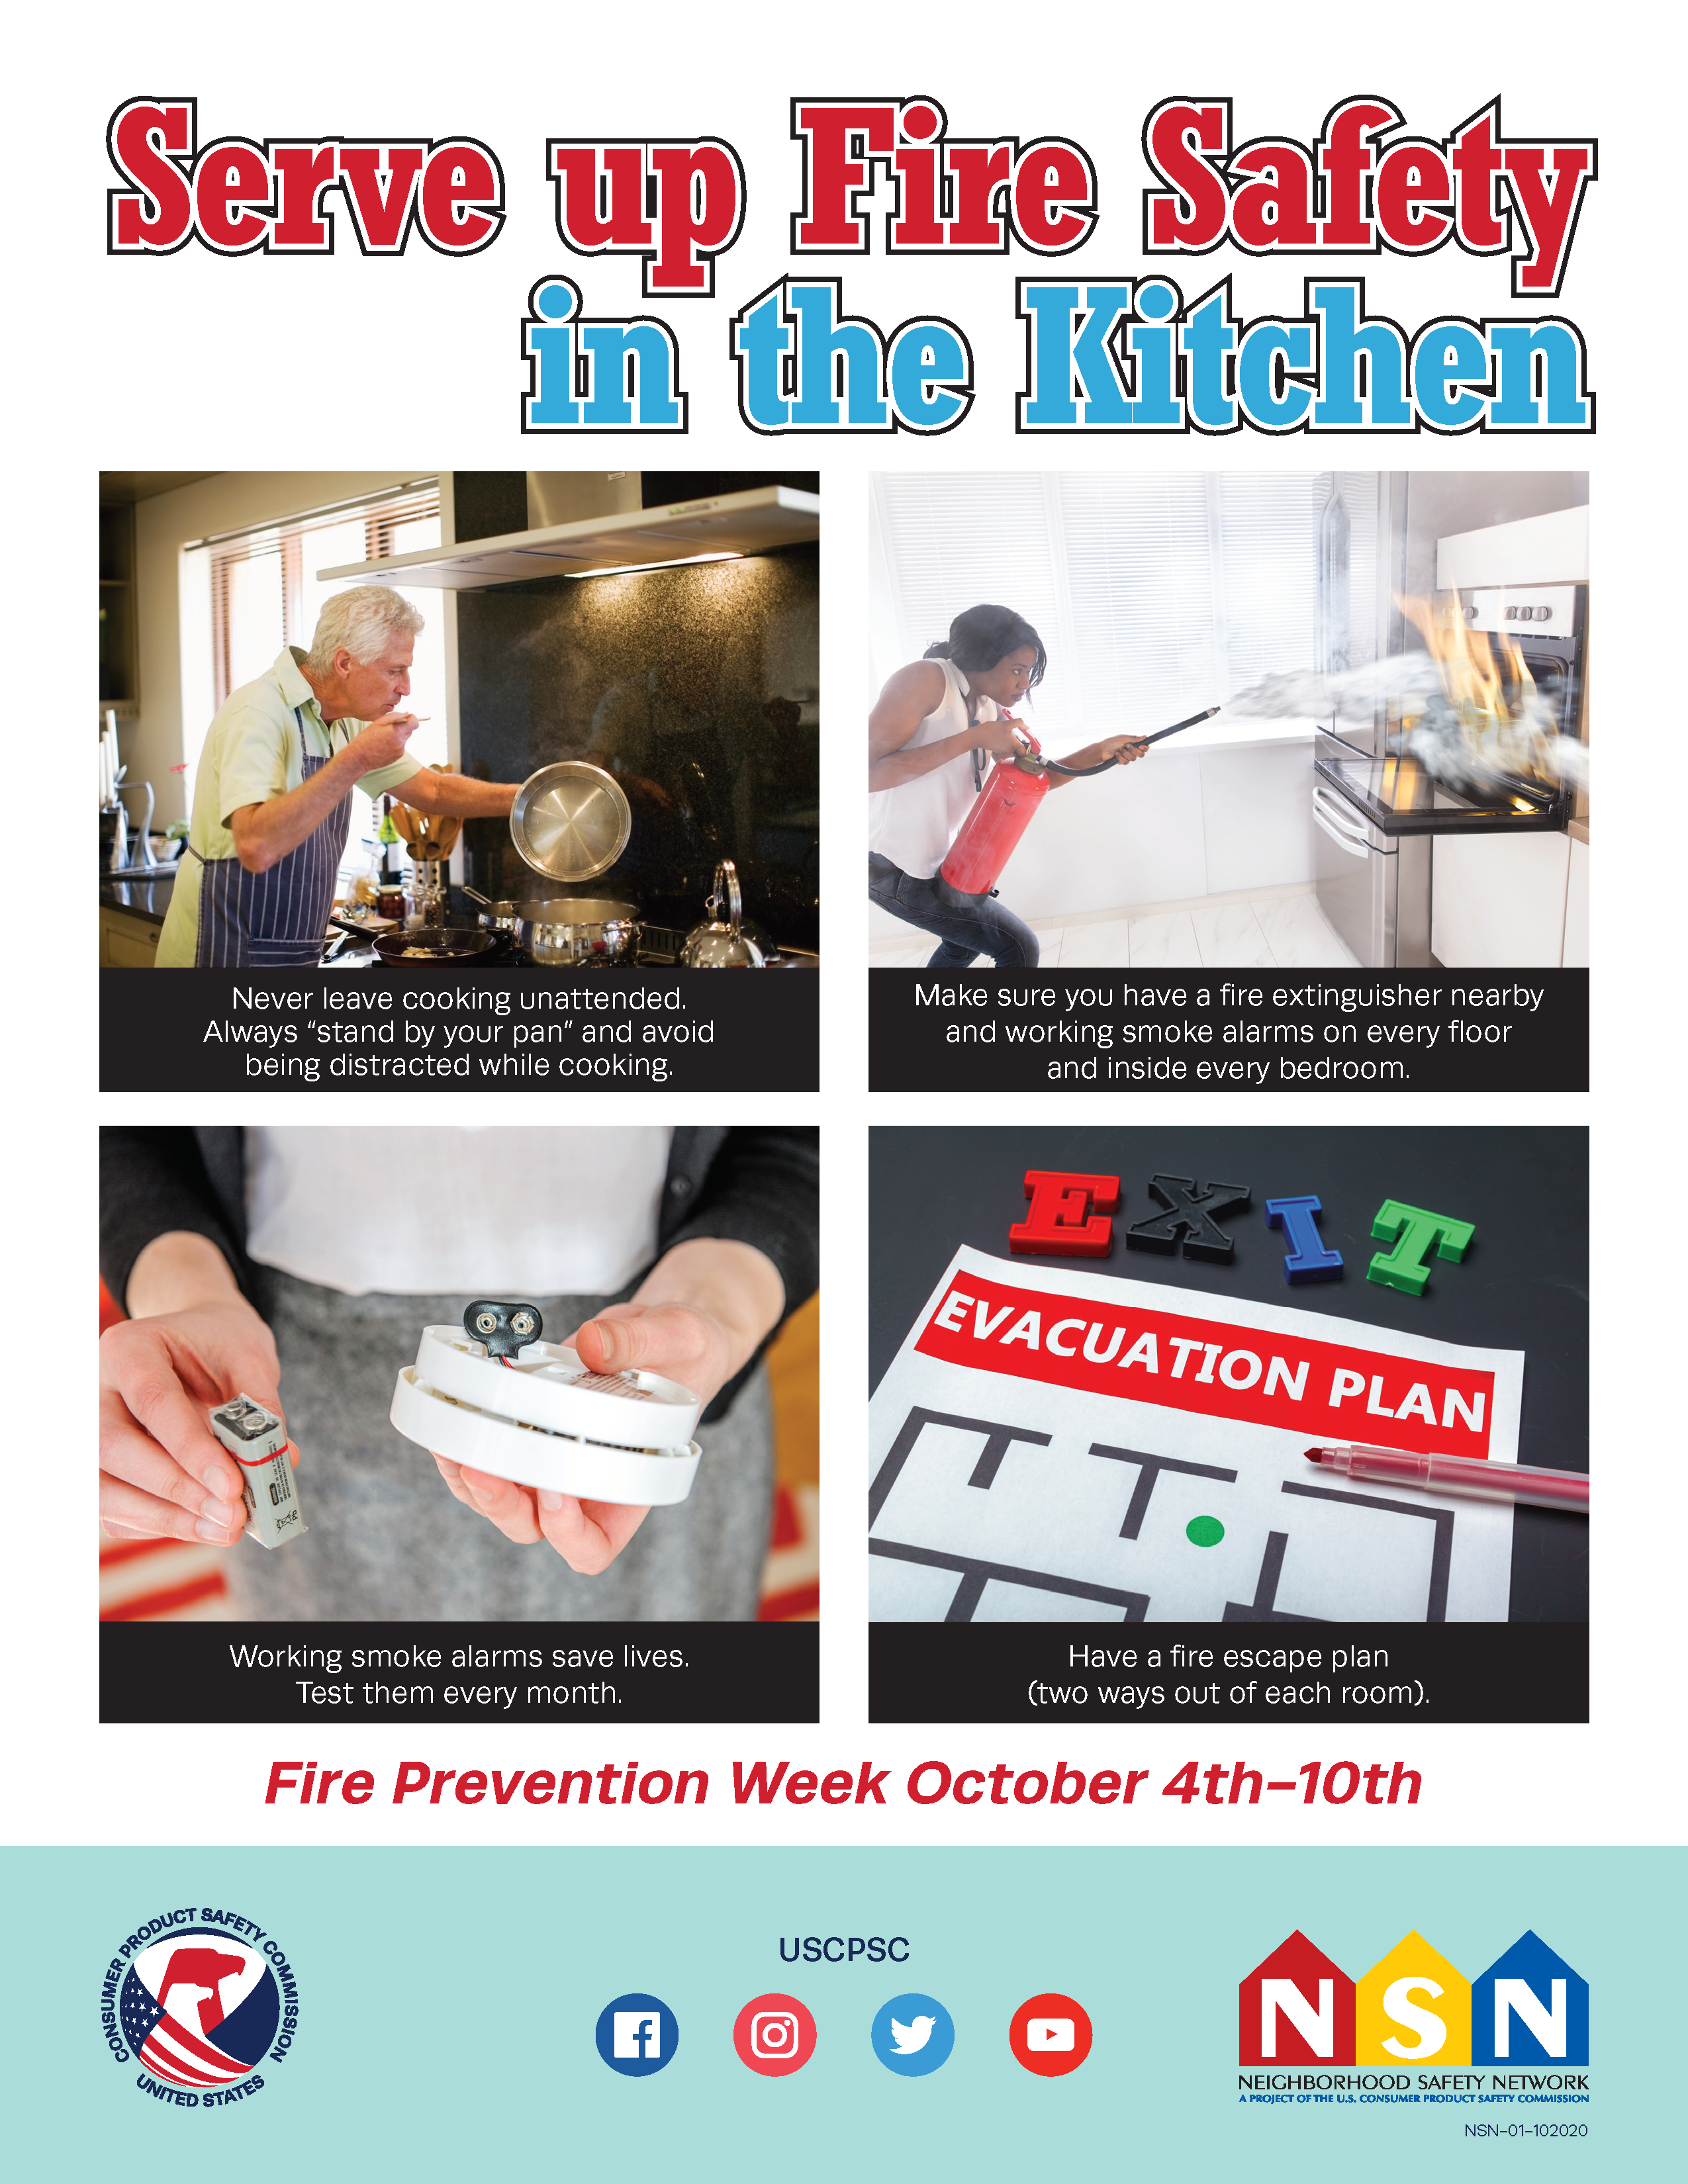 https://www.cpsc.gov/s3fs-public/Serve-up-Fire-Safety-in-the-Kitchen_FINAL.png